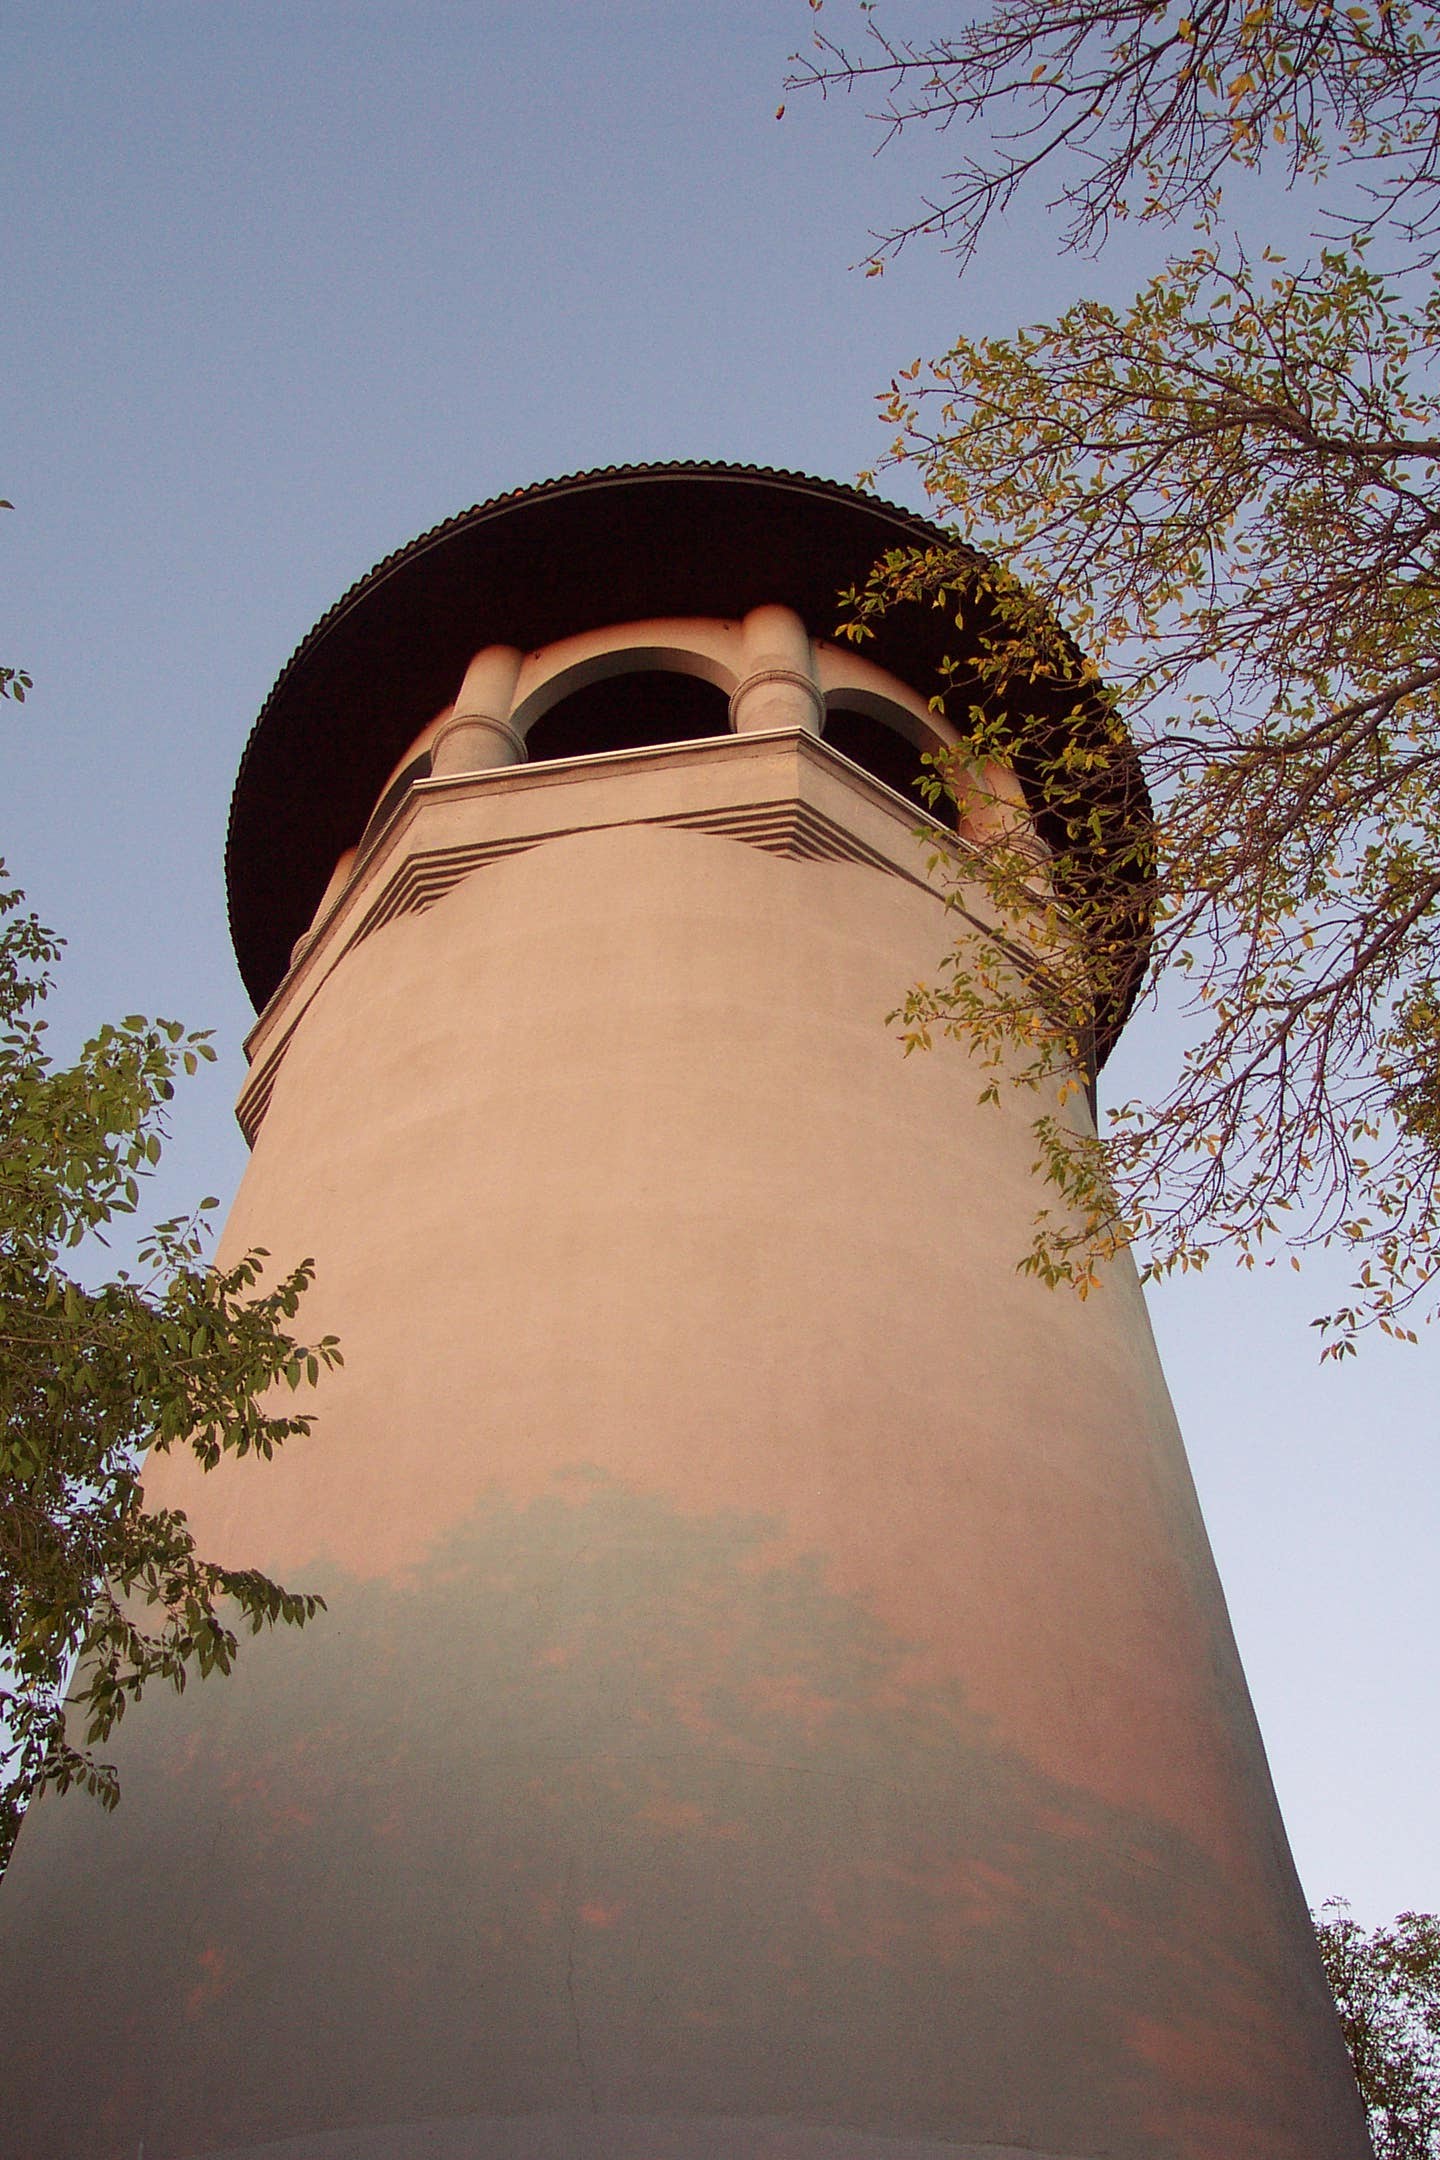 Prospect Park Witch's Hat Water Tower, at 100